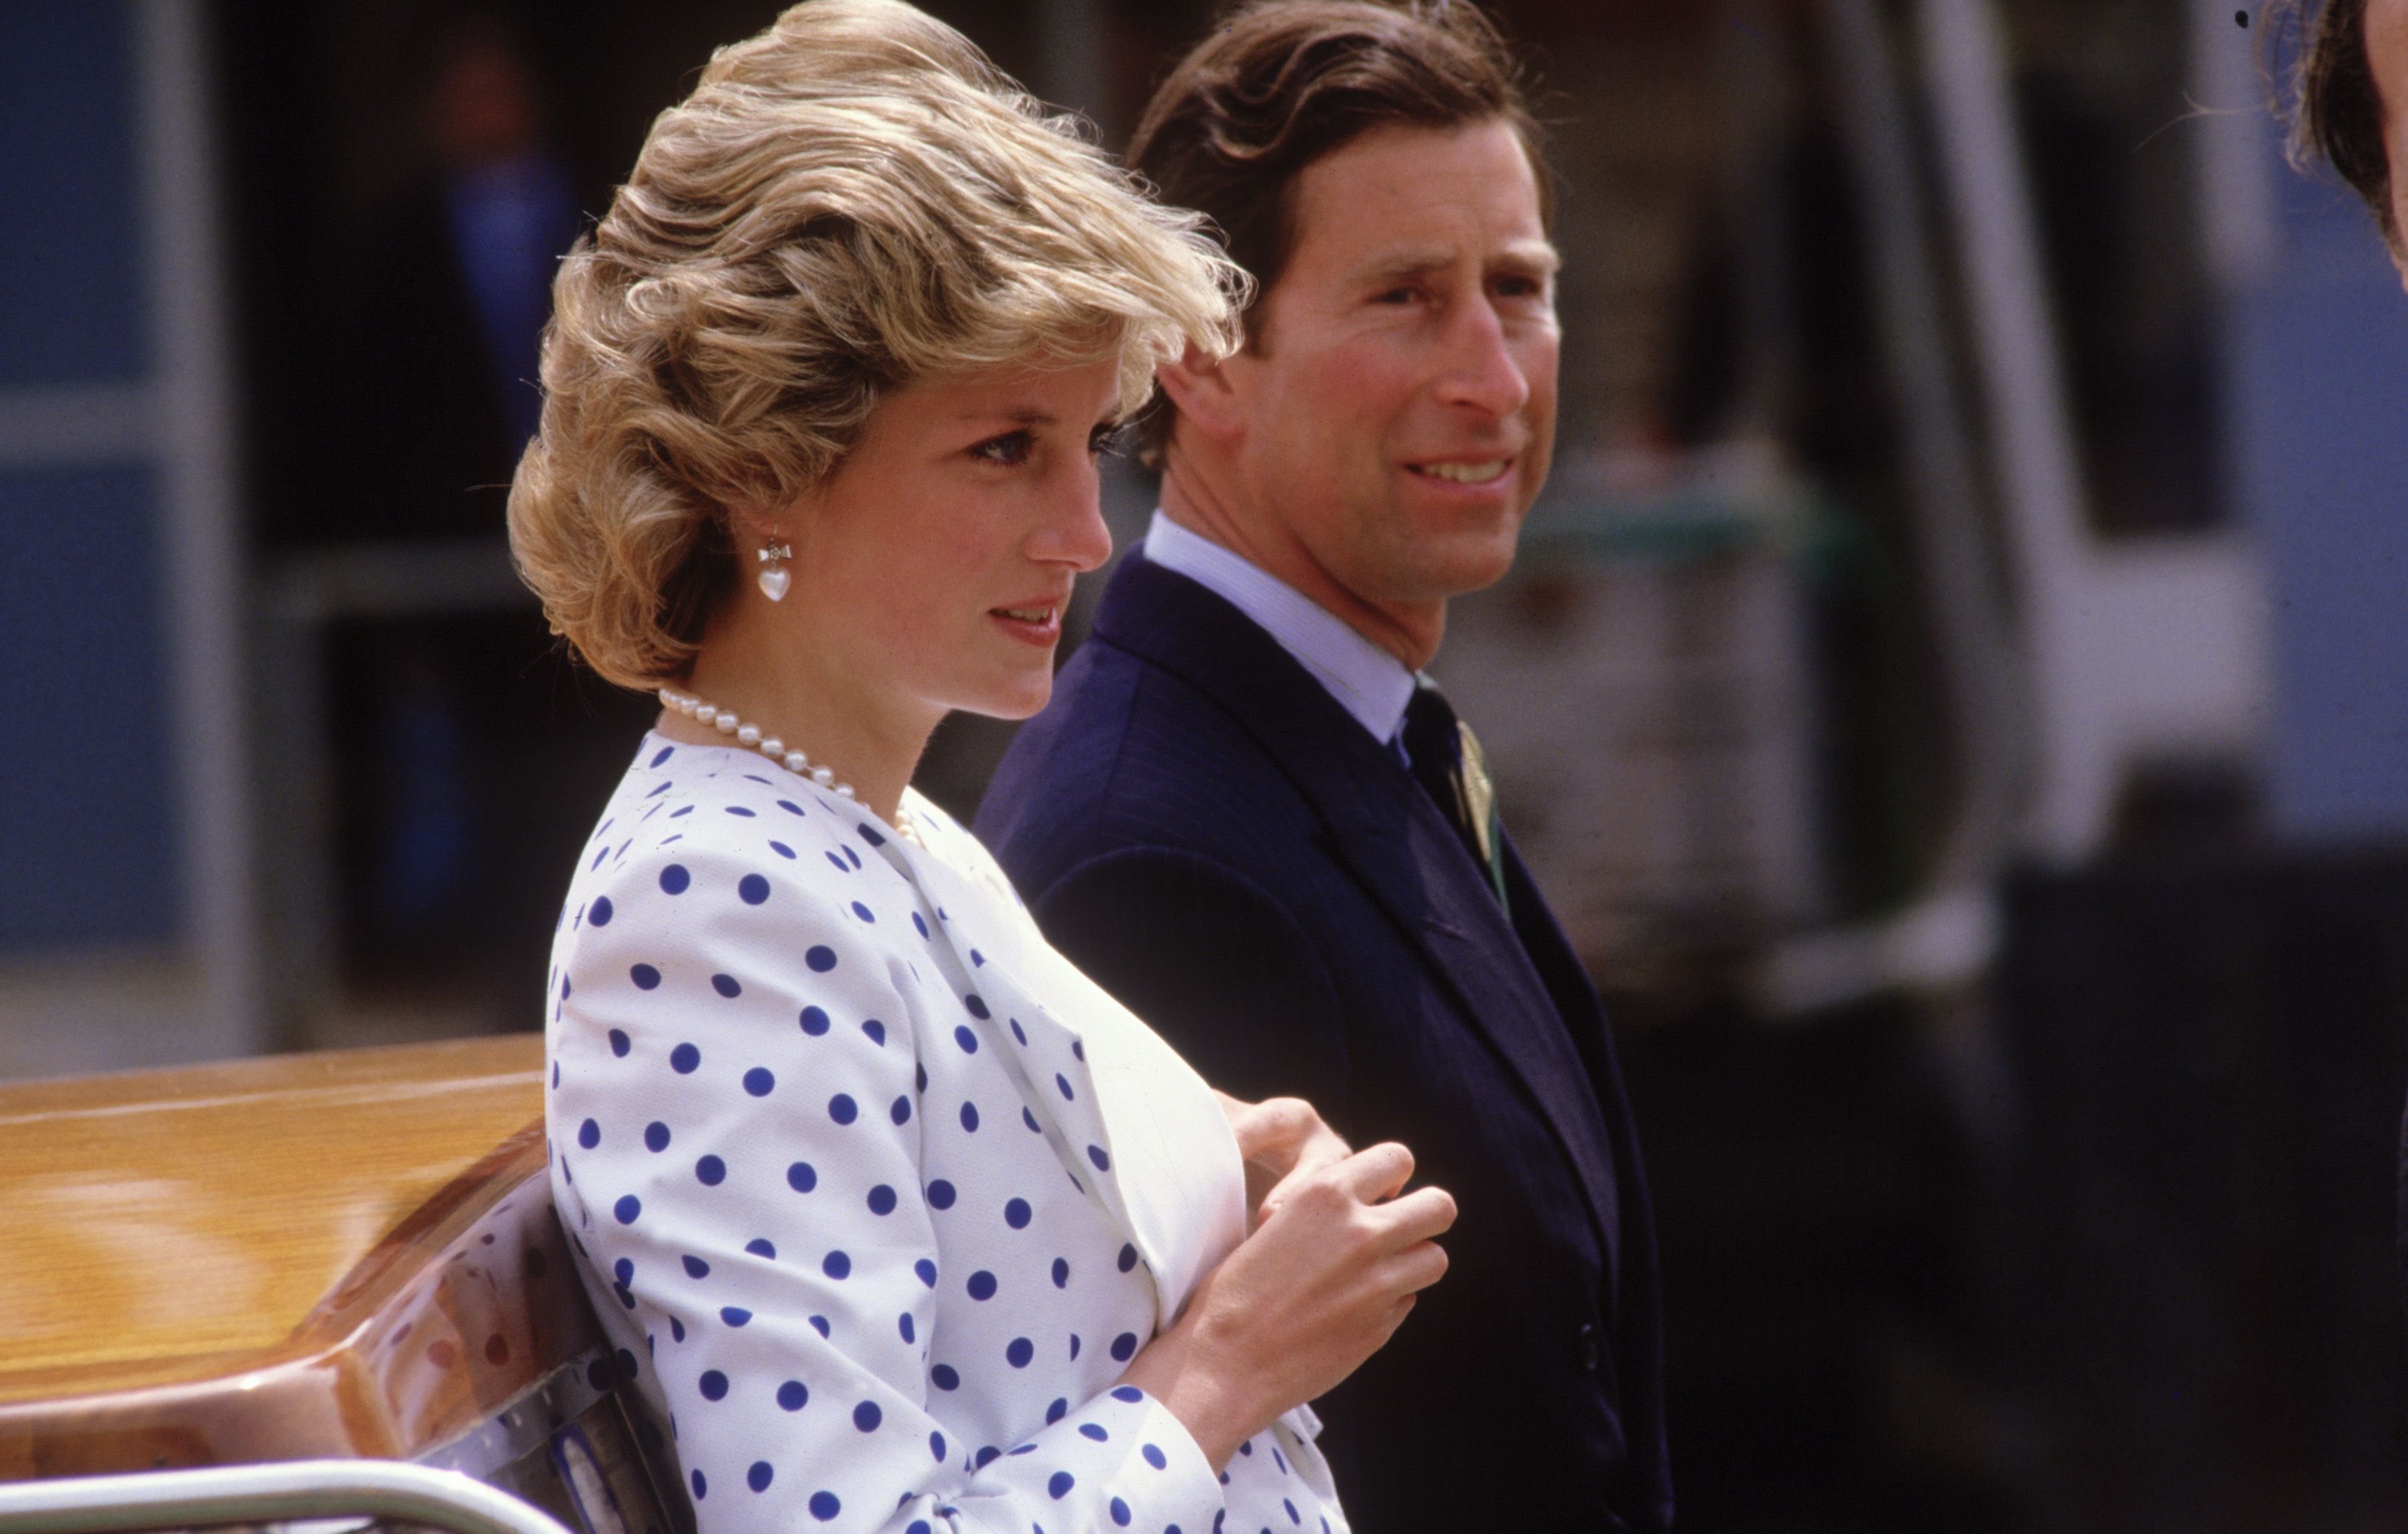 Diana Princess of Wales and Prince Charles travel by motor boat. | Source: Getty Images